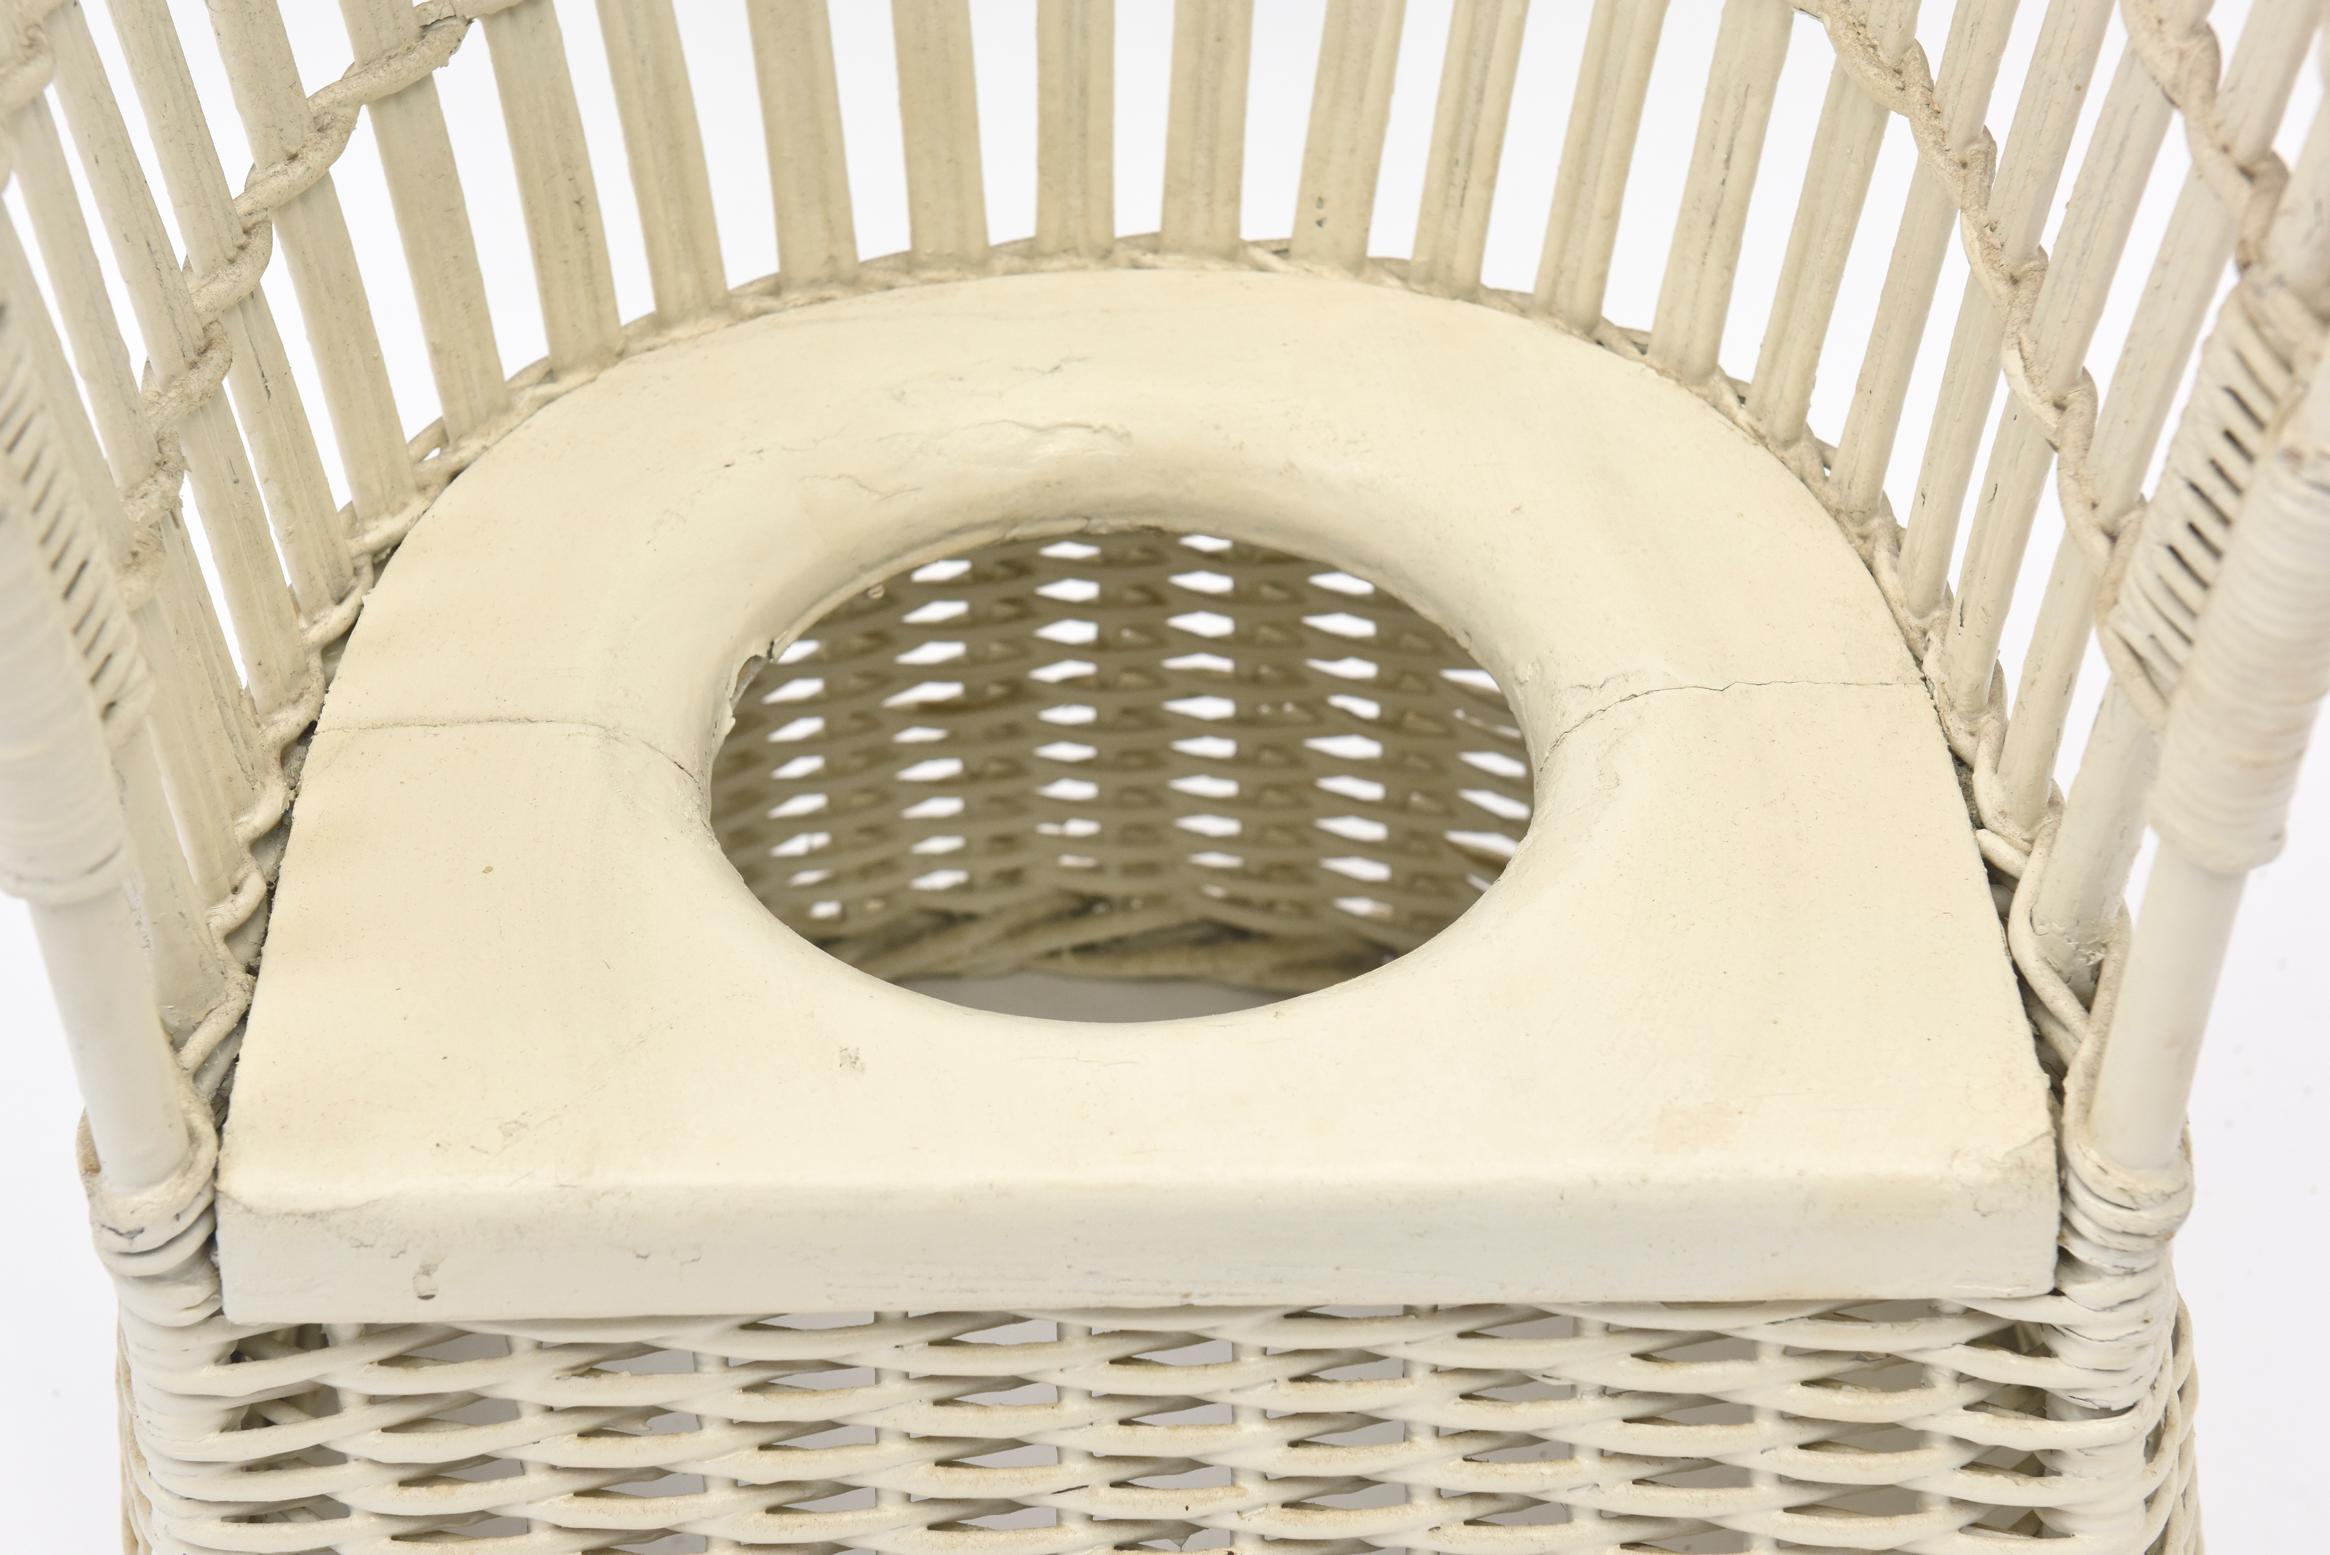 Post-Modern Mid-20th Century Wicker Potty Seat For Sale